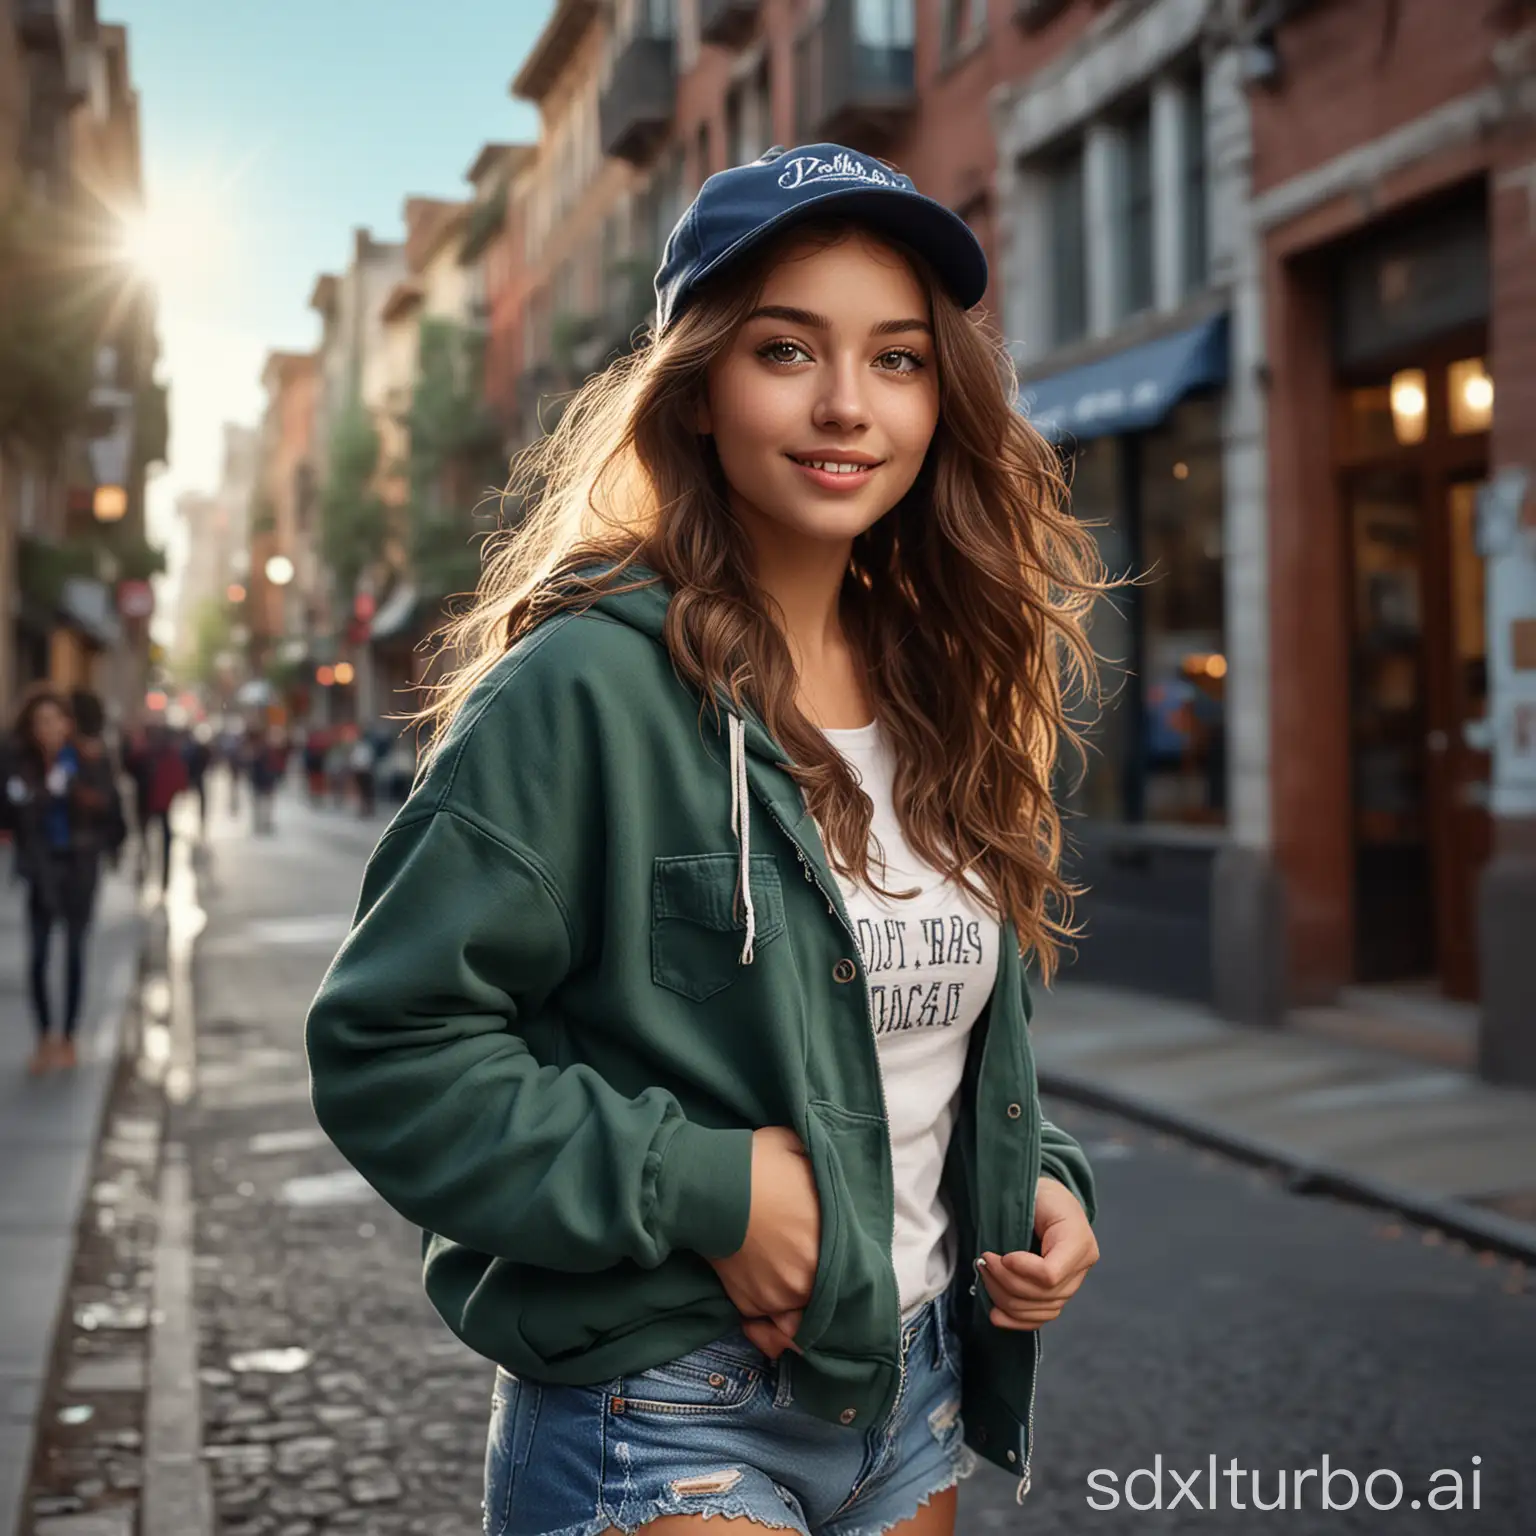 An ultra-detailed, ultra-realistic photo of a cheerful and playful young woman walking down a city street, dressed casually and stylishly in dreamy and fantasy setting. She has long, wavy brown hair peeking out from under a dark blue baseball cap. She is wearing a green hoodie with a cityscape design on the front, paired with ripped denim shorts. She carries a backpack, suggesting she might be a traveler or student. The street around her is bustling with activity, with people walking in the background and buildings lining the street. The lighting suggests it's either early morning or late afternoon, giving a warm glow to the scene. The lighting is warm and soft, adding to the serene and picturesque setting. Her expression is cheerful, with attractive, captivating eyes that draw the viewer in. The lighting accentuates the soft curves of her face, and her wavy hair frames her features gracefully. , wide aspect ratio